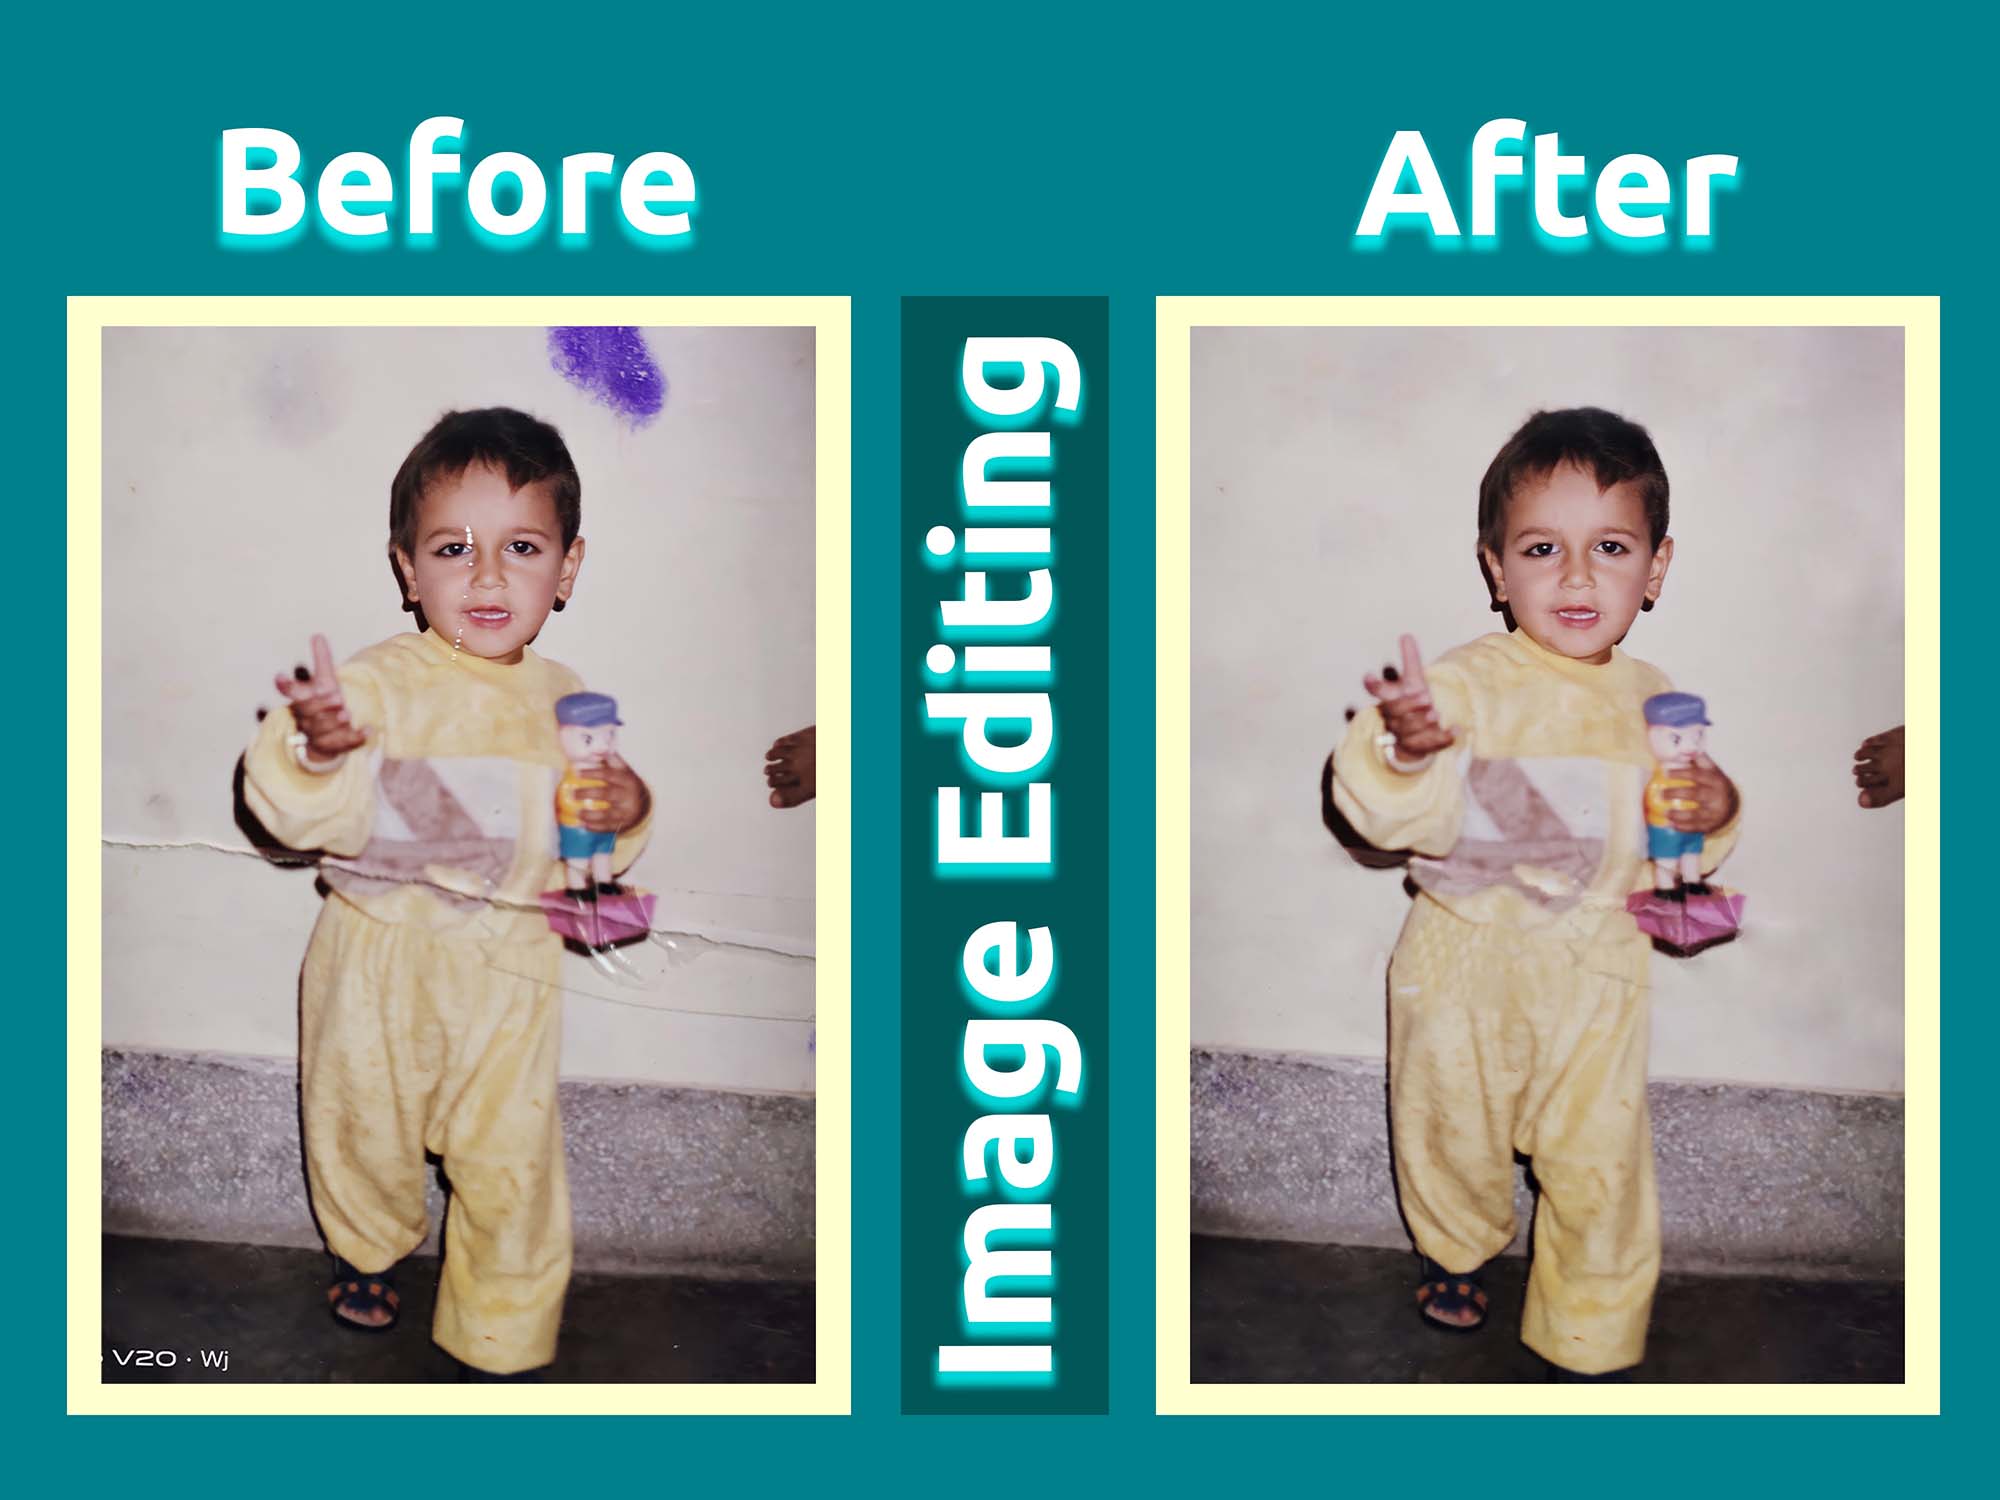 Image Editing & Background Removal / Change